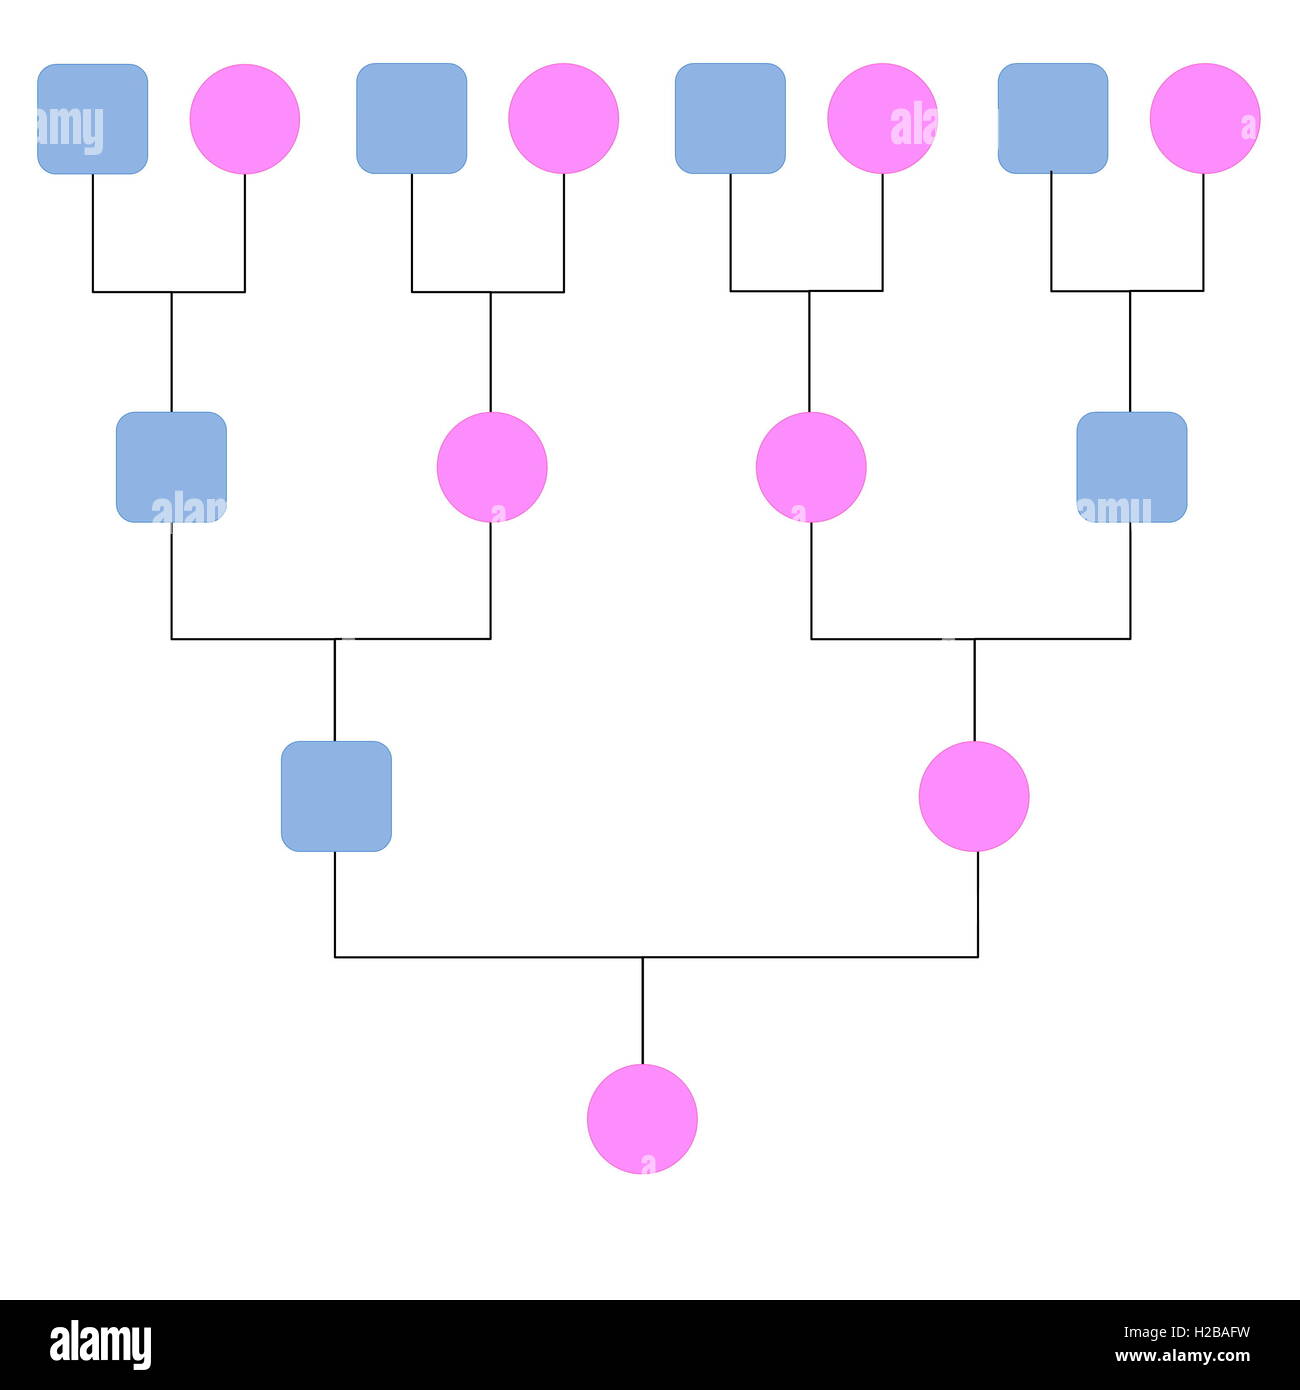 What is a Pedigree Chart in Genealogy? - Root To Branches